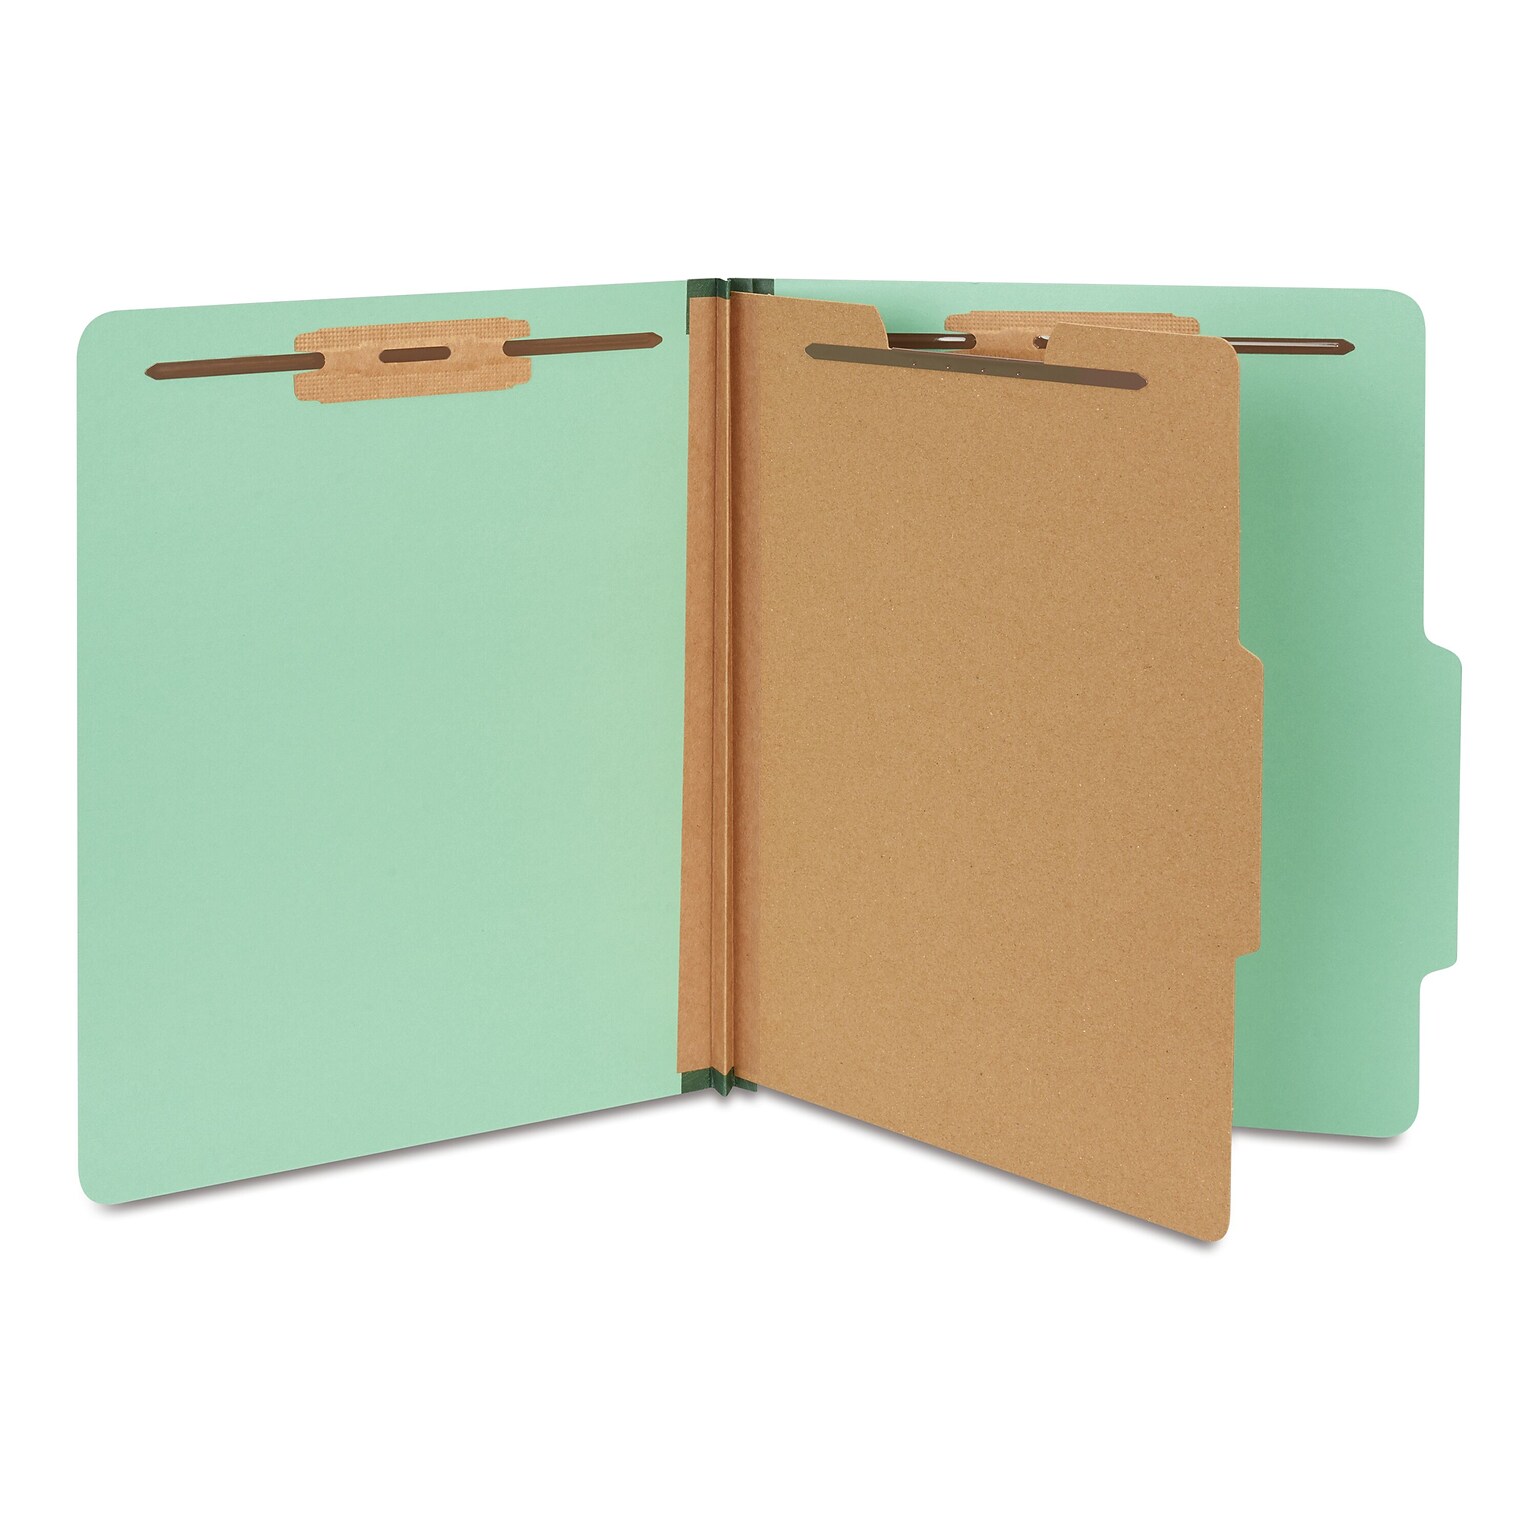 Staples 60% Recycled Pressboard Classification Folder, 1-Divider, 1.75 Expansion, Letter Size, Light Green, 20/Box